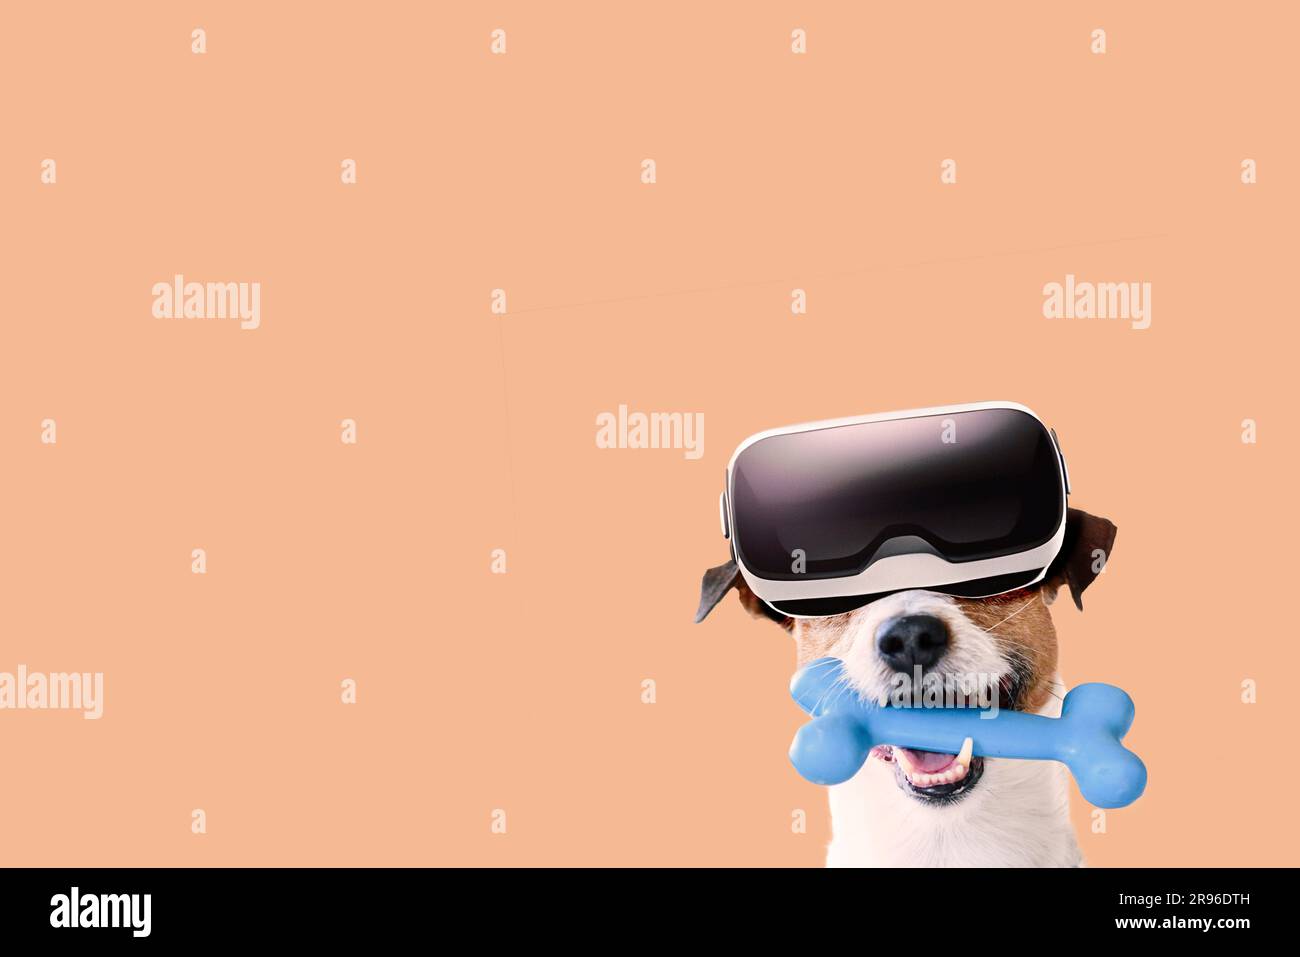 Dog wearing VR headset playing with toy bone. Humorous virtual reality gaming concept Stock Photo